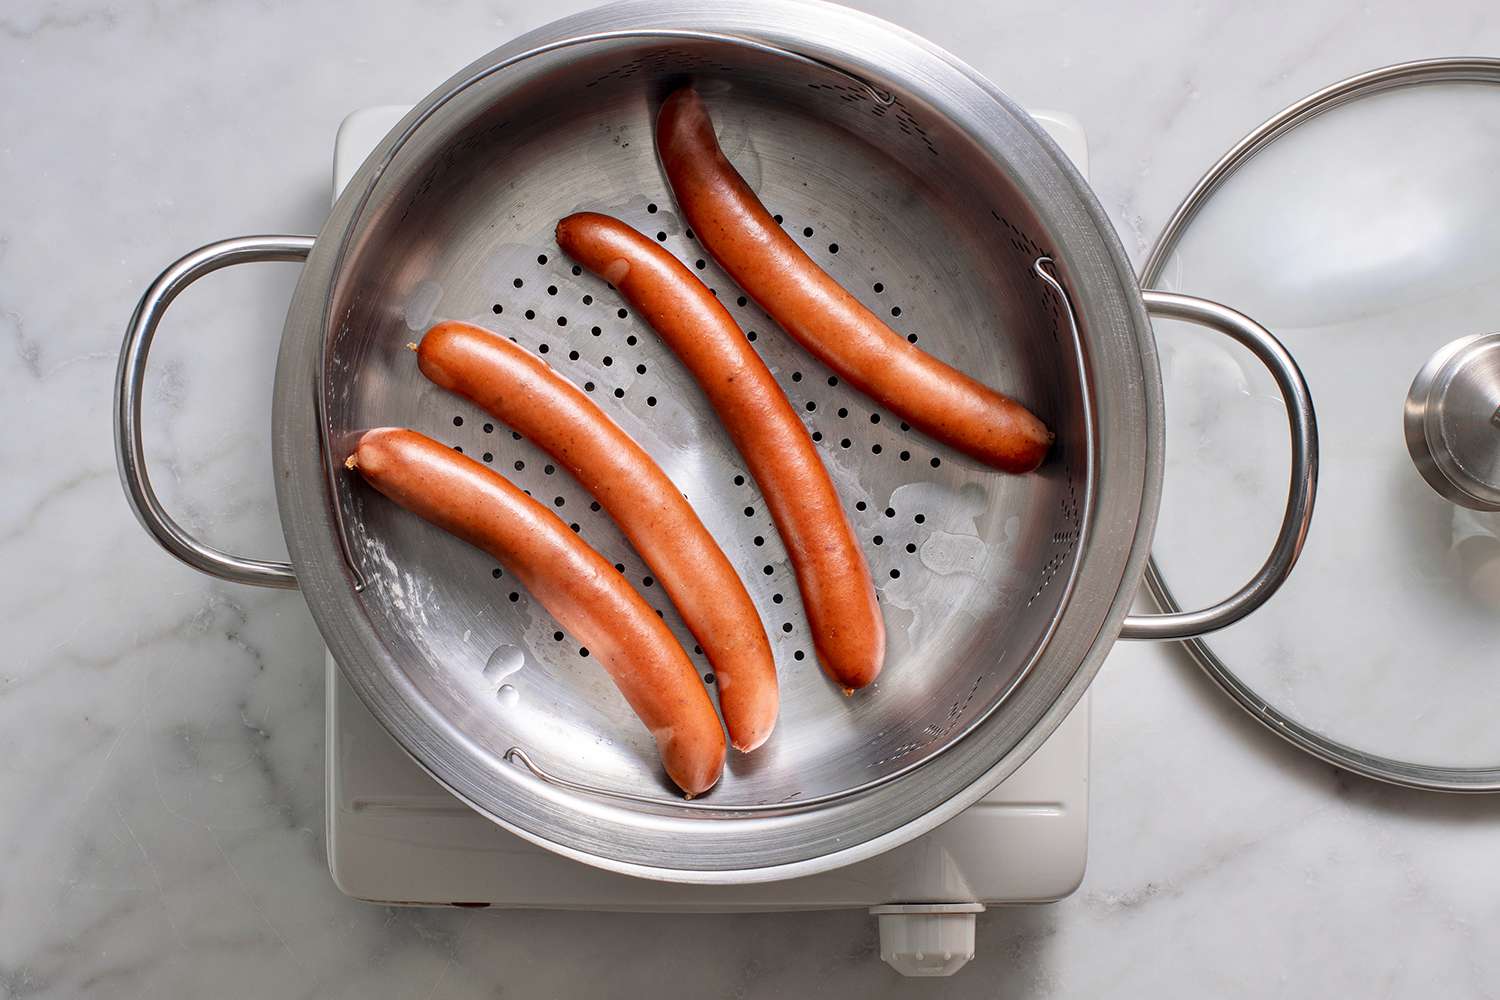 Cooked hot dogs in a steamer basket